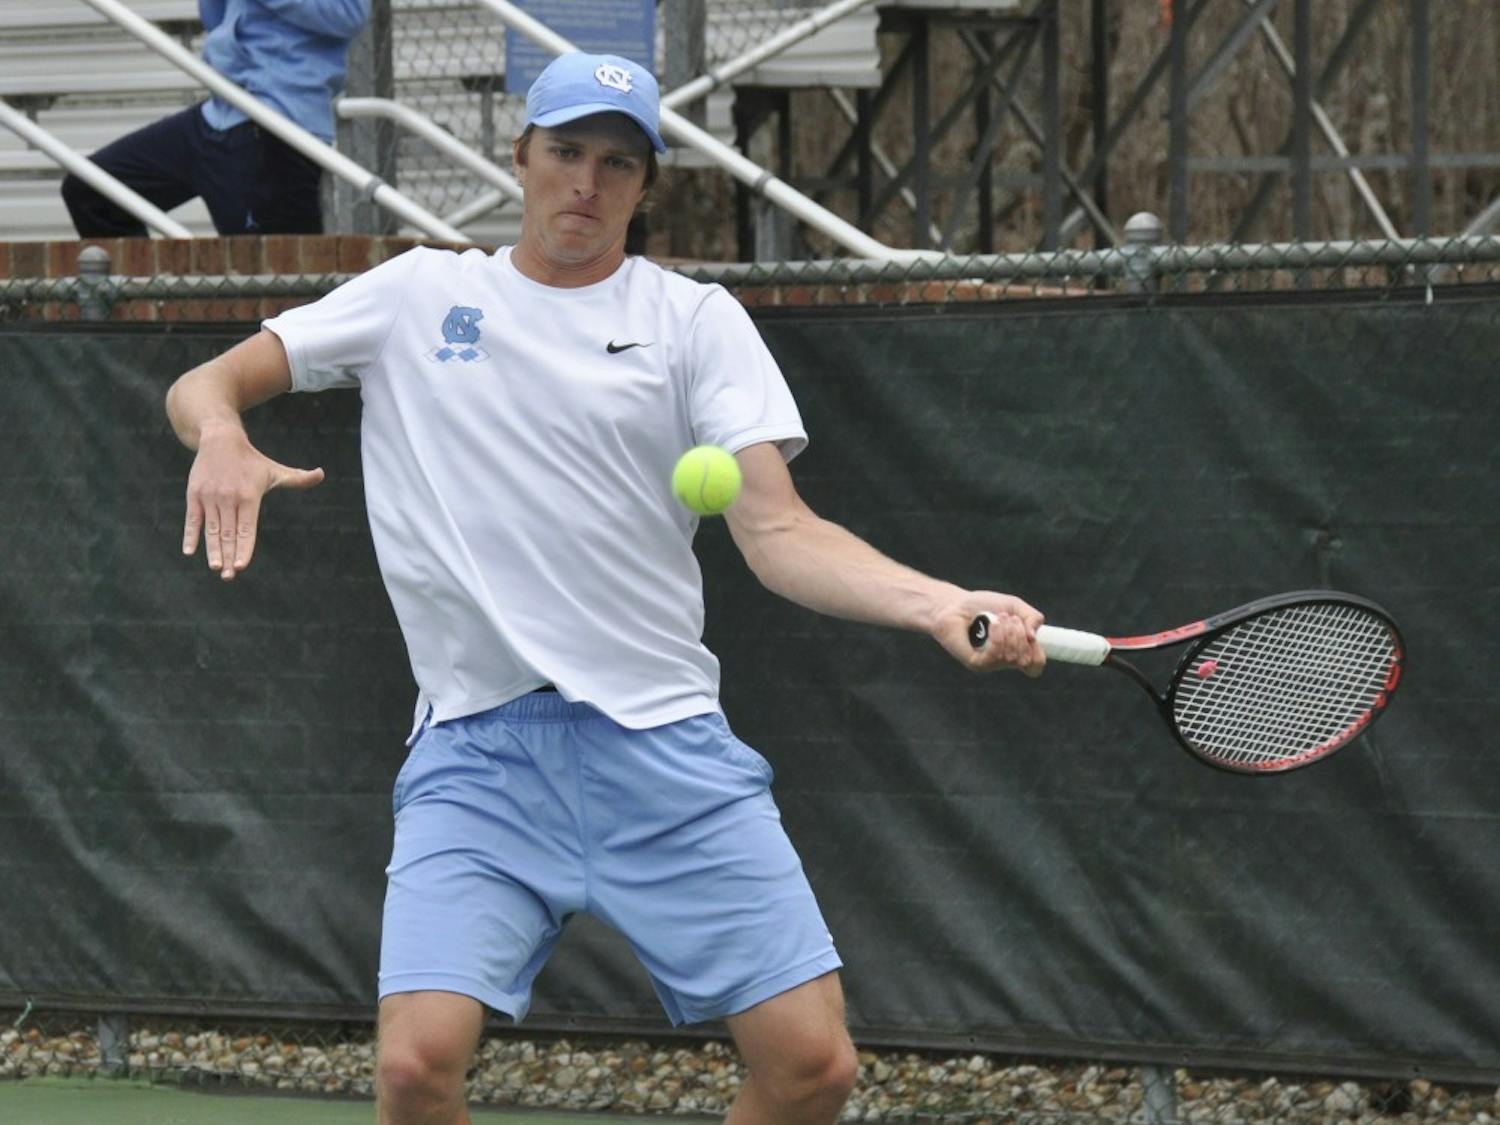 First-year Brian Cernoch hits a forehand during UNC's match against Florida State on Sunday, March 31, 2019. The Heels beat the Seminoles 6-1.